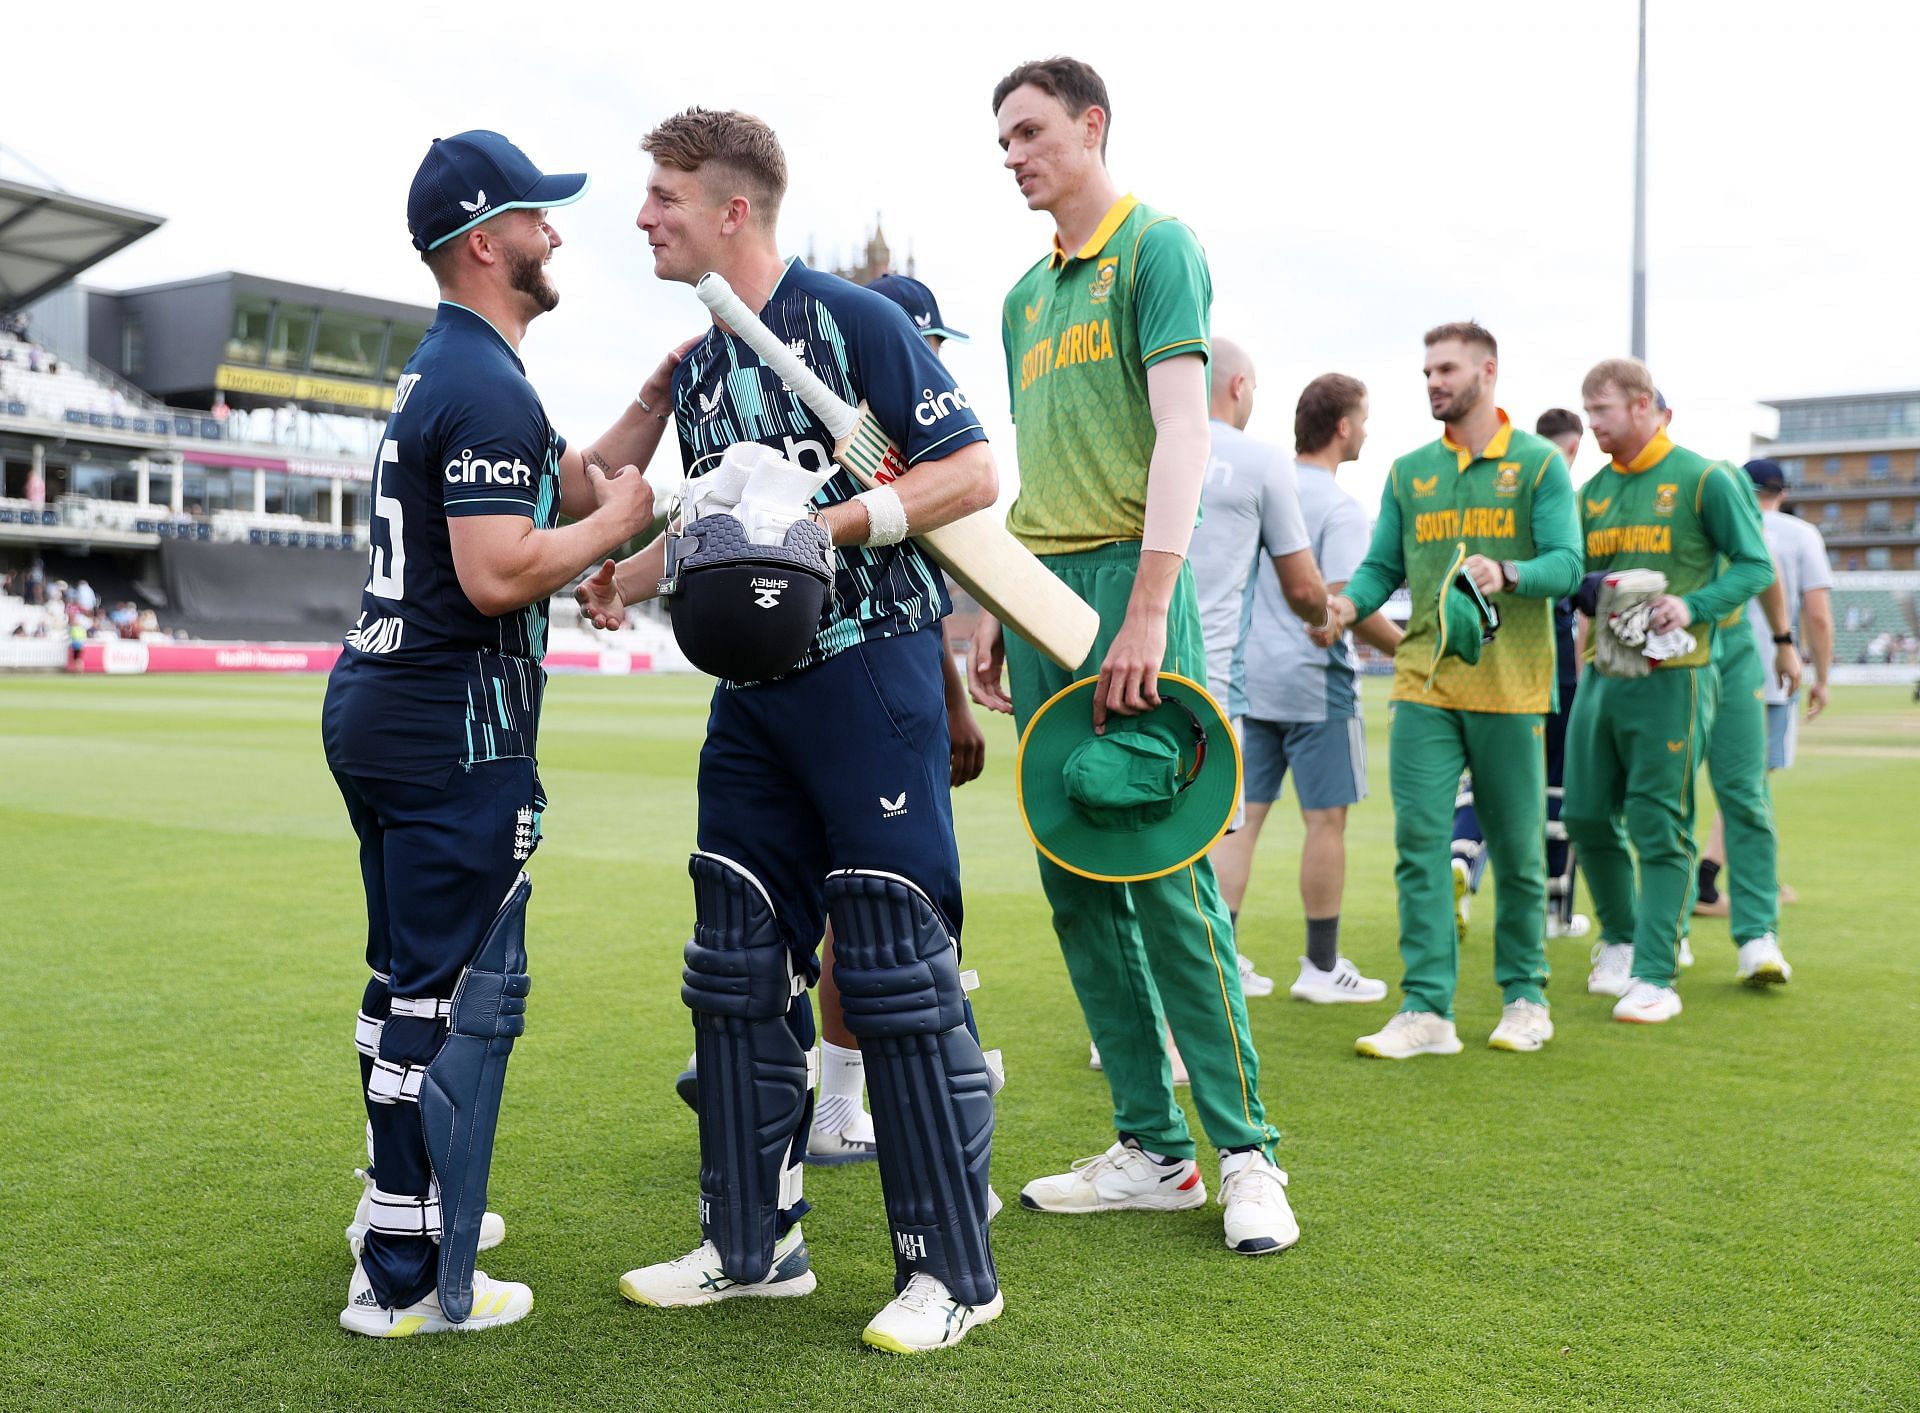 England Lions vs South Africa, 2nd One-Day Warm-up Match Probable XIs, Match Prediction, Pitch Report and Weather Forecast